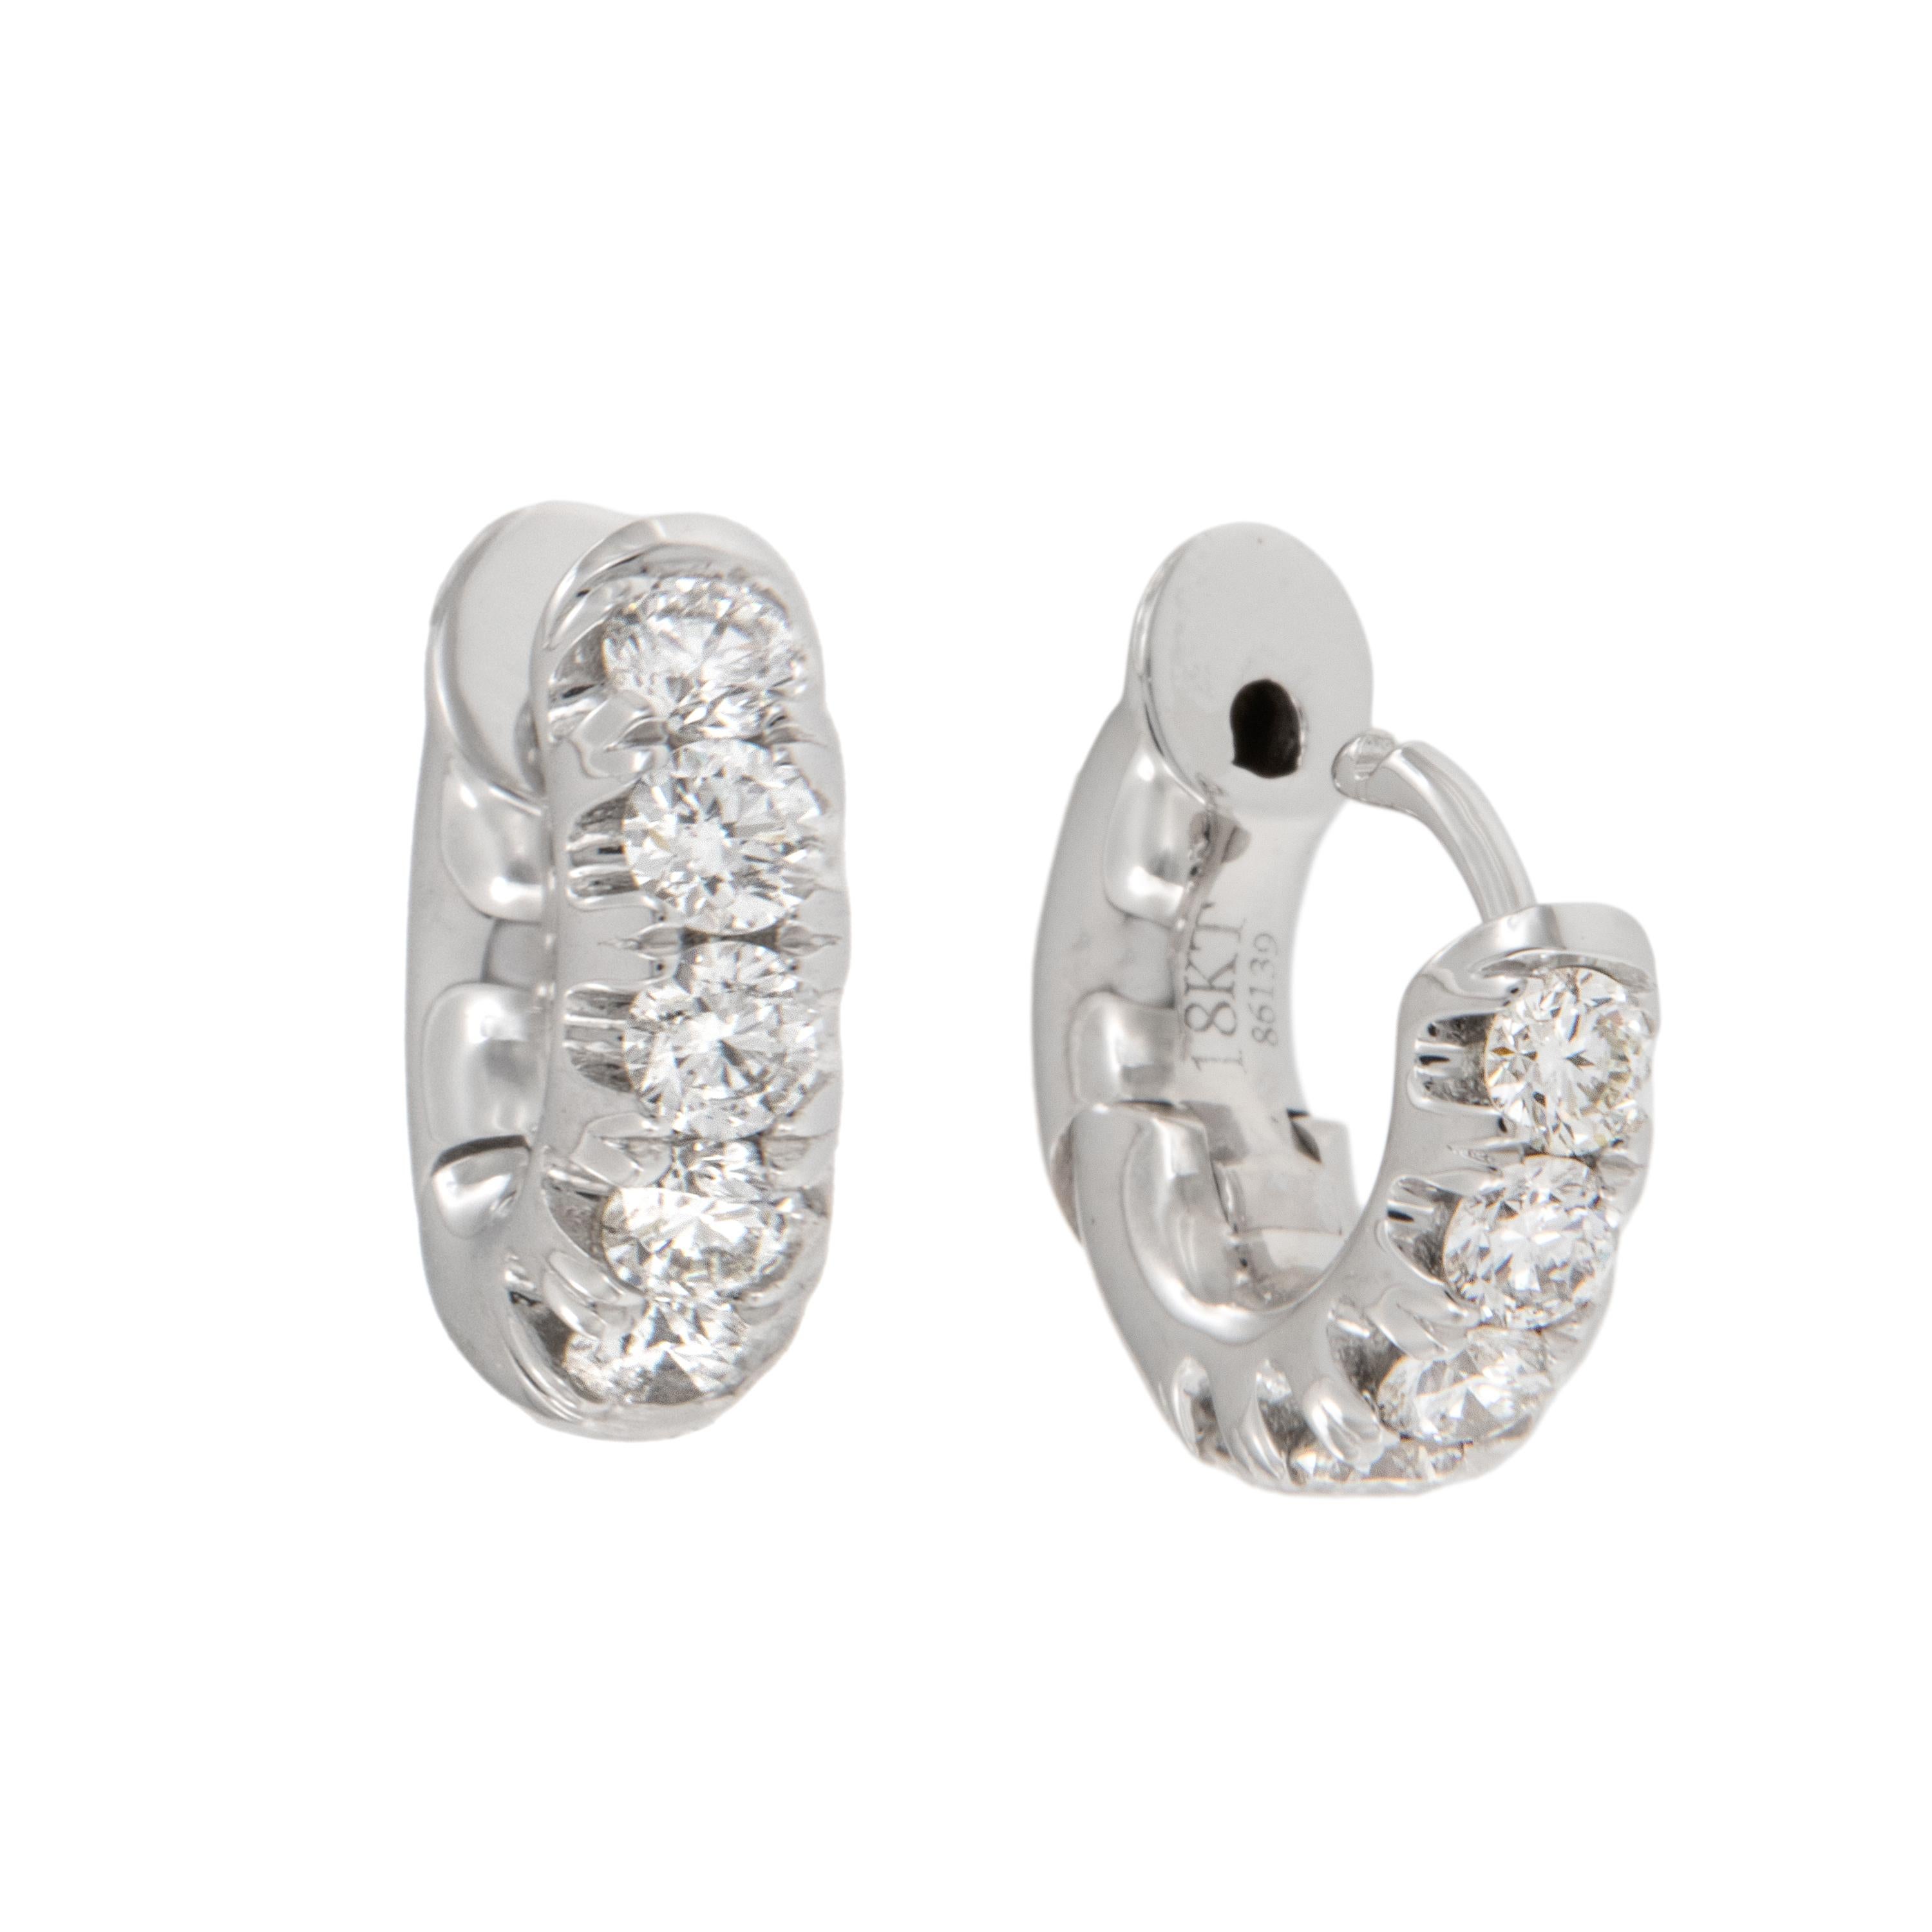 Beautiful split prong diamond earrings you can wear every day! Made from fine 18 karat white gold, these huggy earrings boast 0.50 Cttw. of VS clarity, G-H color diamonds. Being huggy style the hinged earring backs come up to click into the front